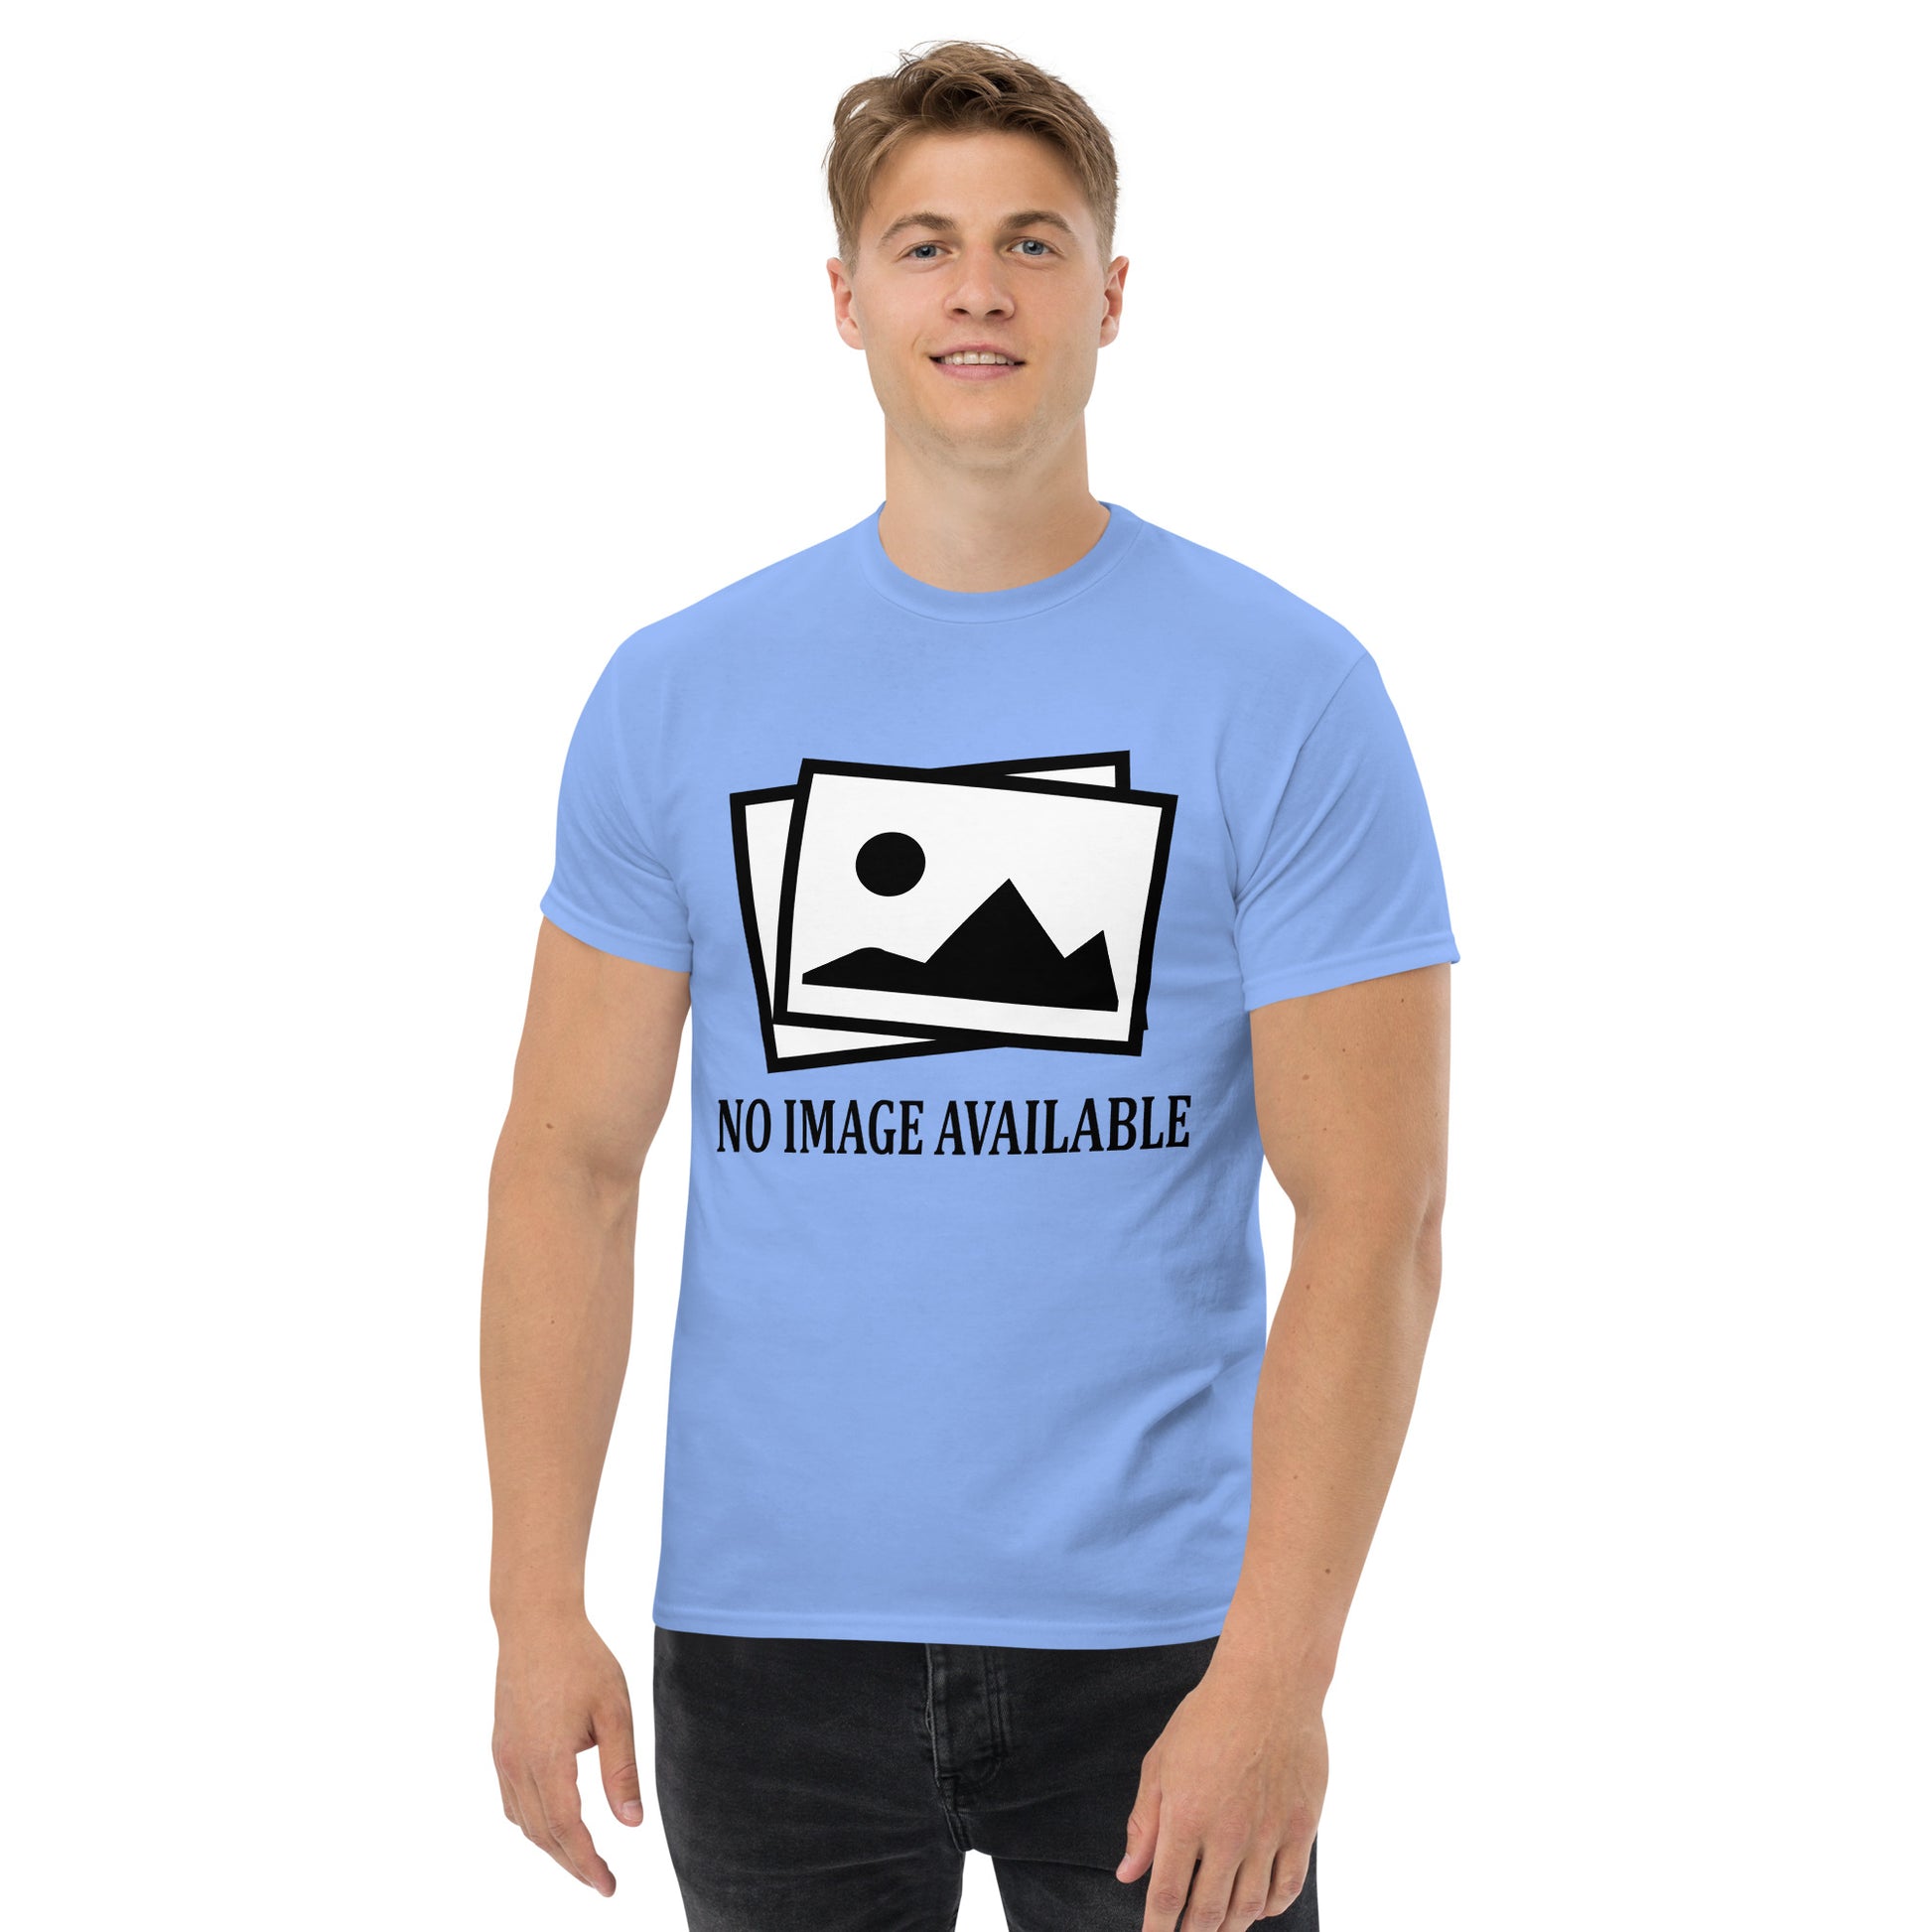 Men with carolina blue t-shirt with image and text "no image available"